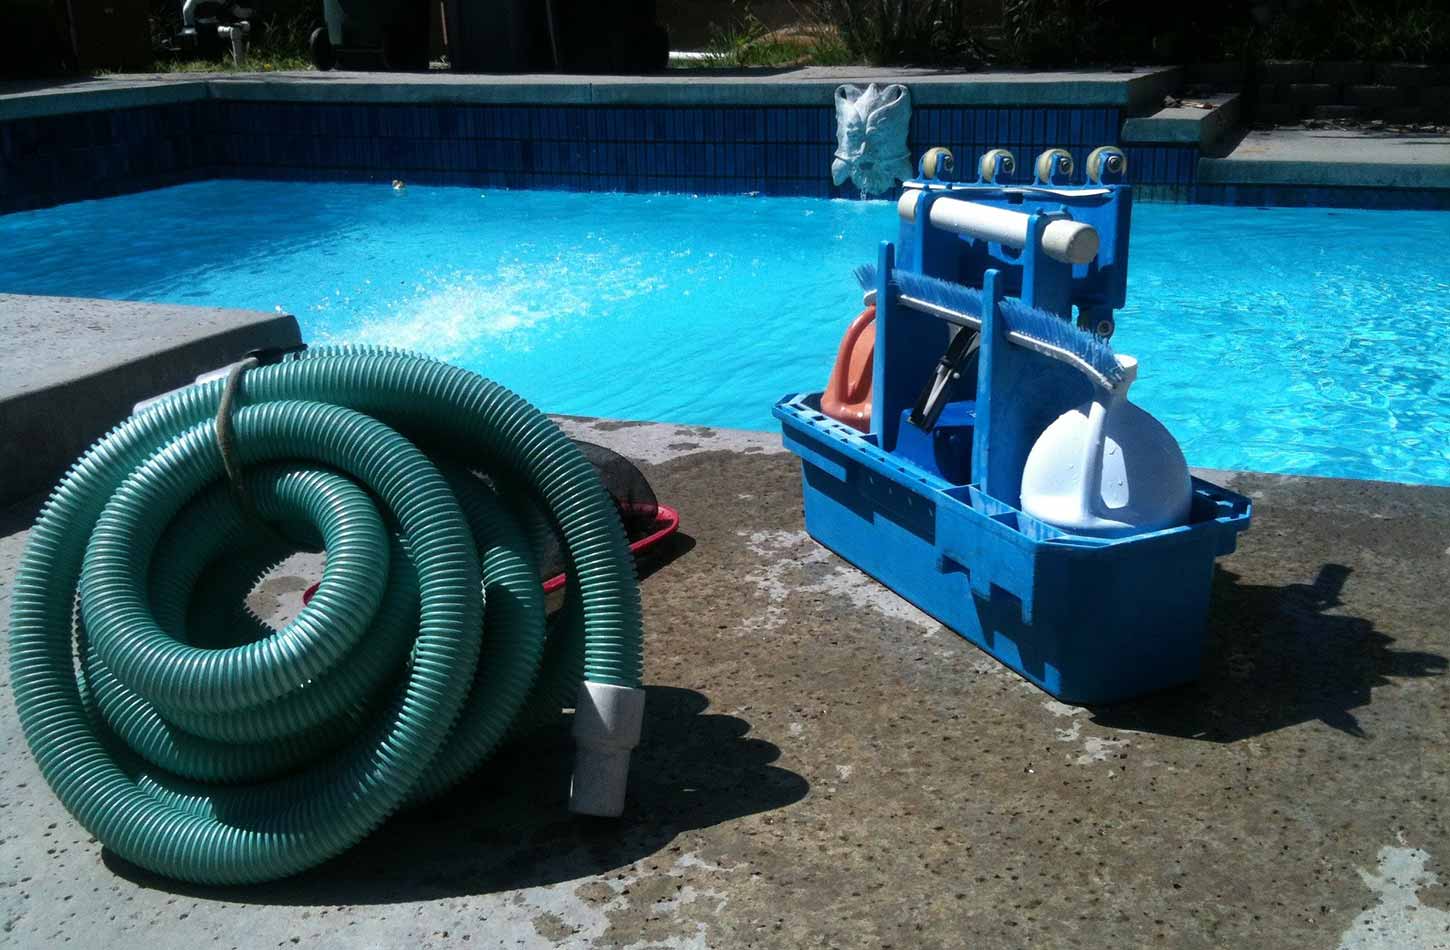 How to ensure your swimming pool once installed is hassle free and stays hassle free